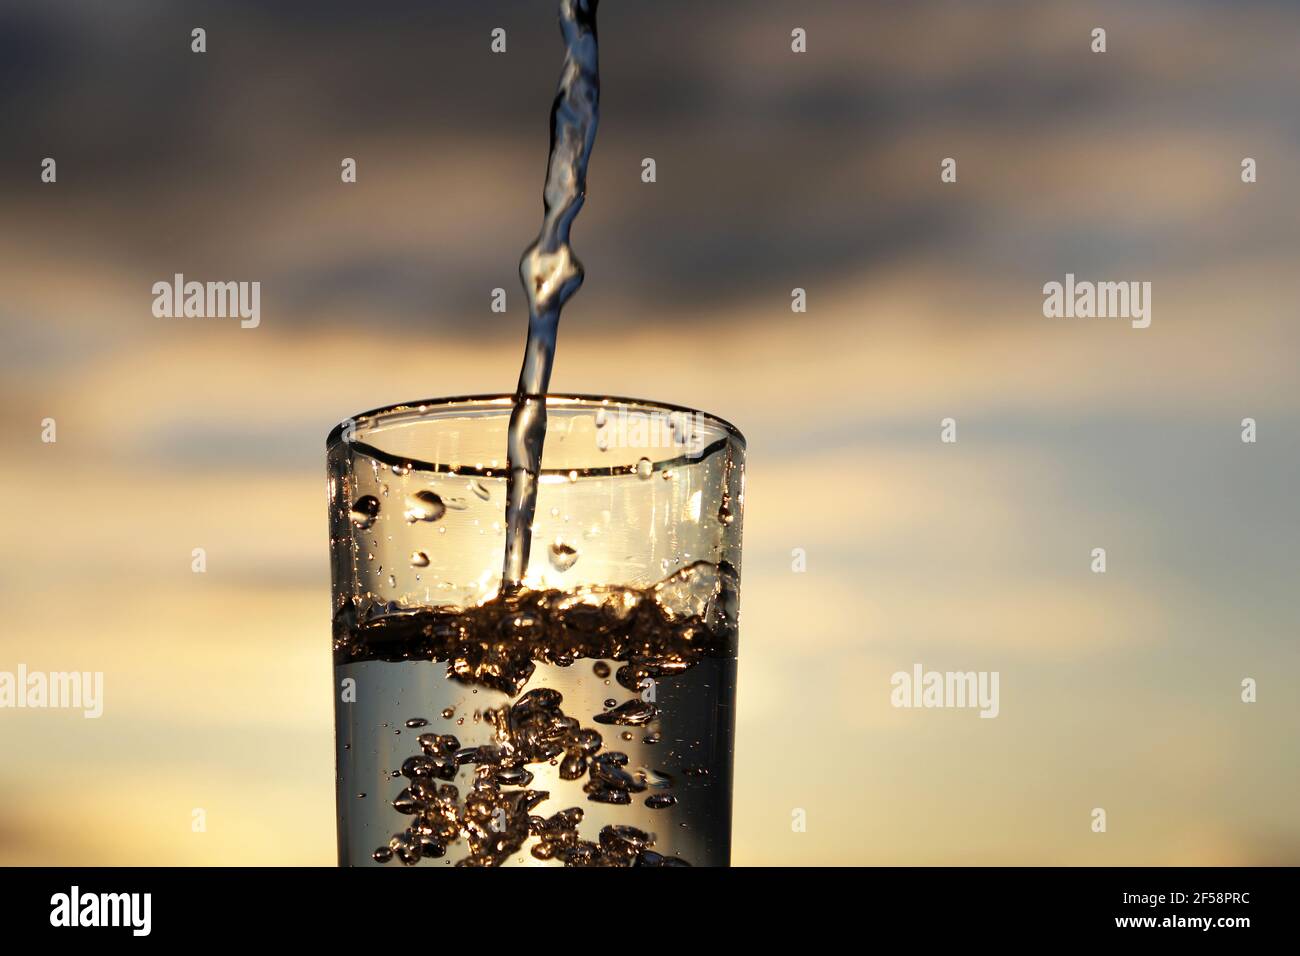 Clean water pouring into drinking glass on sunset blurred background.  Concept of health and freshness, thirst, water purification Stock Photo -  Alamy